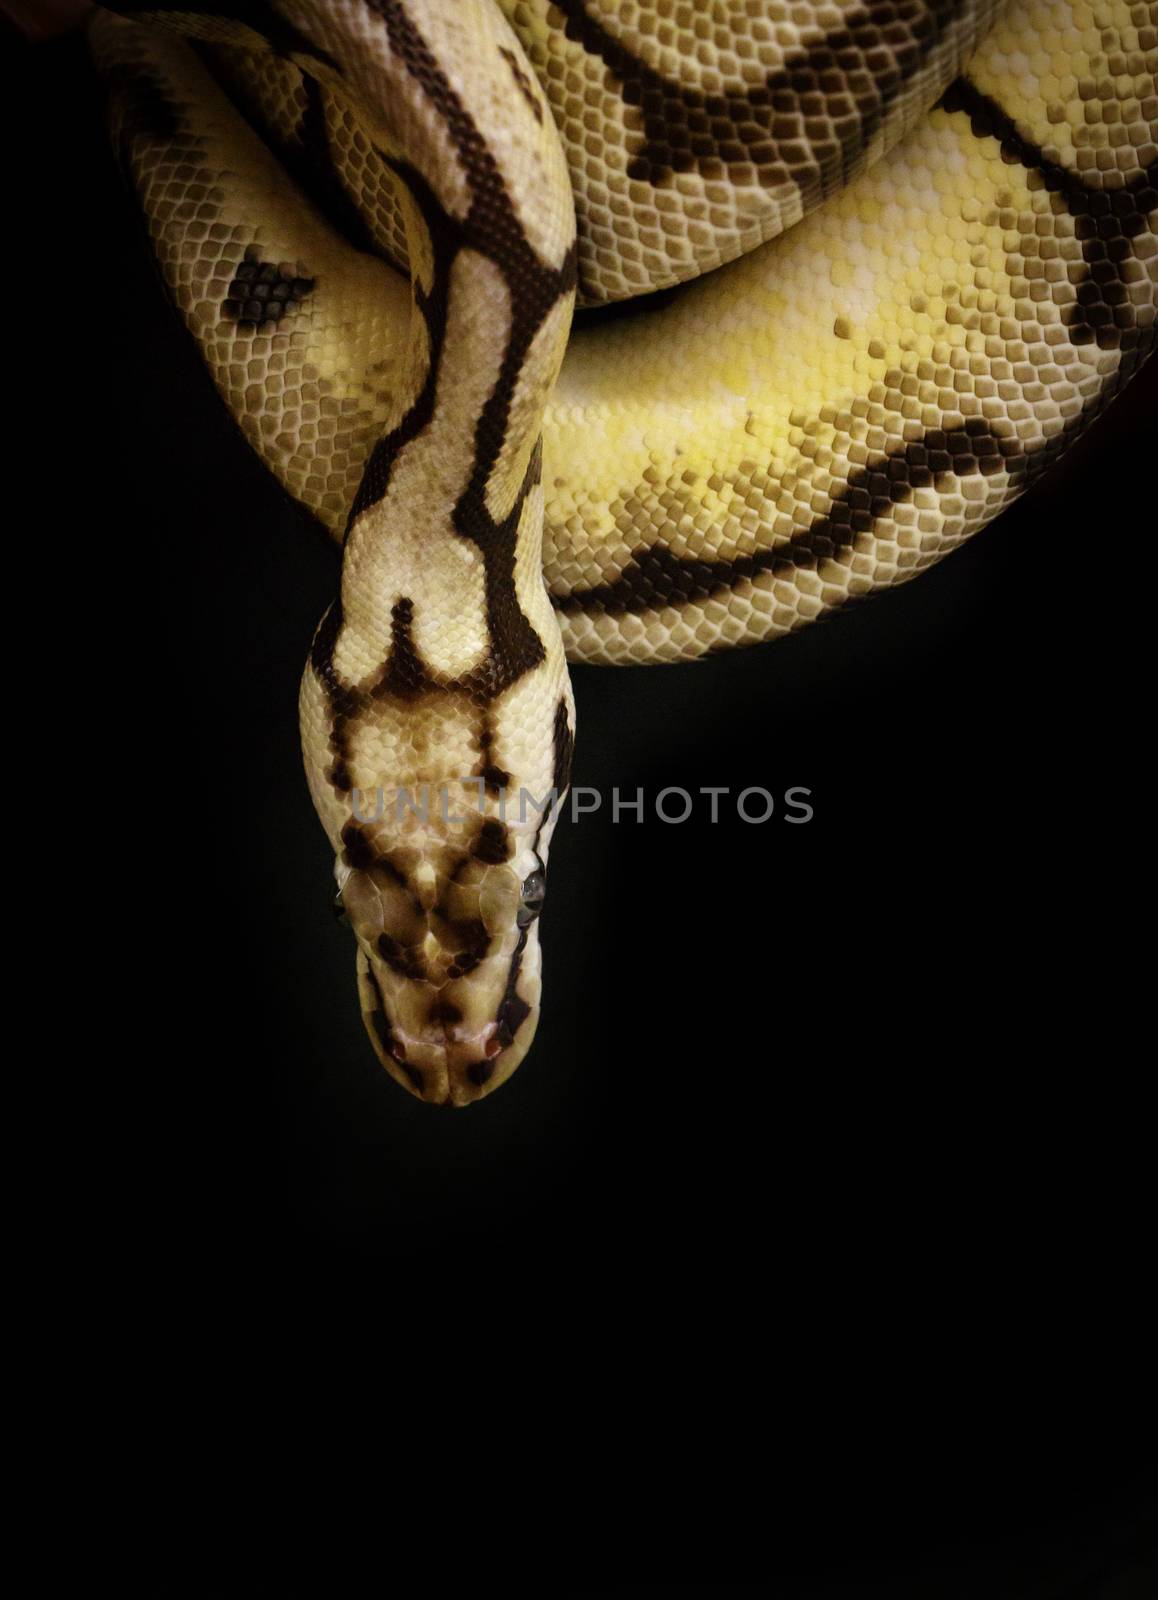 Image of a boa on black background. Reptile. Wild Animals.  by yod67